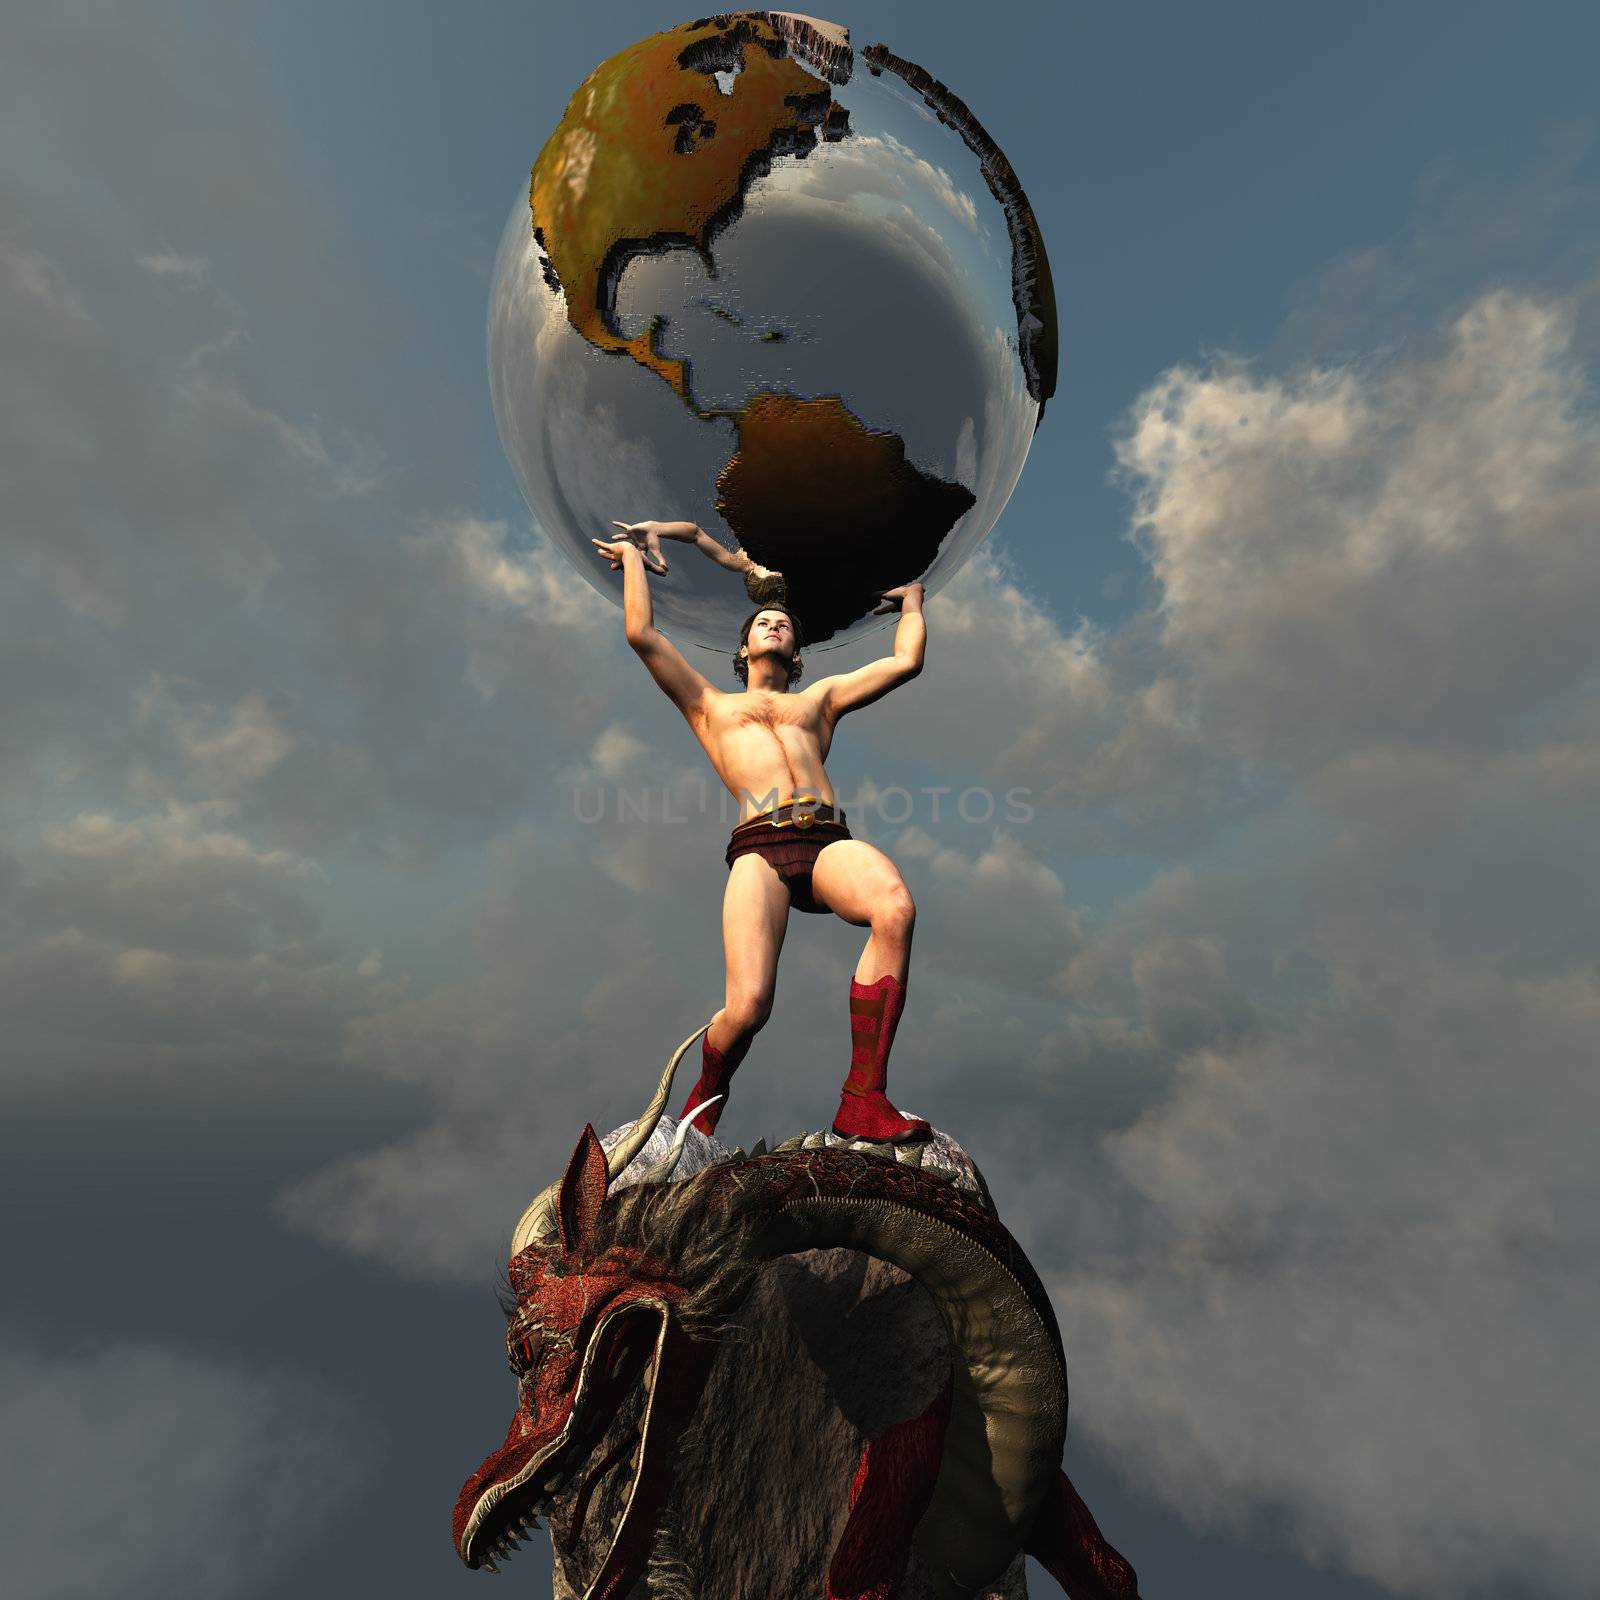 Atlas holds the Earth after he slays the dragon representing the peace and unity in this part of the world.